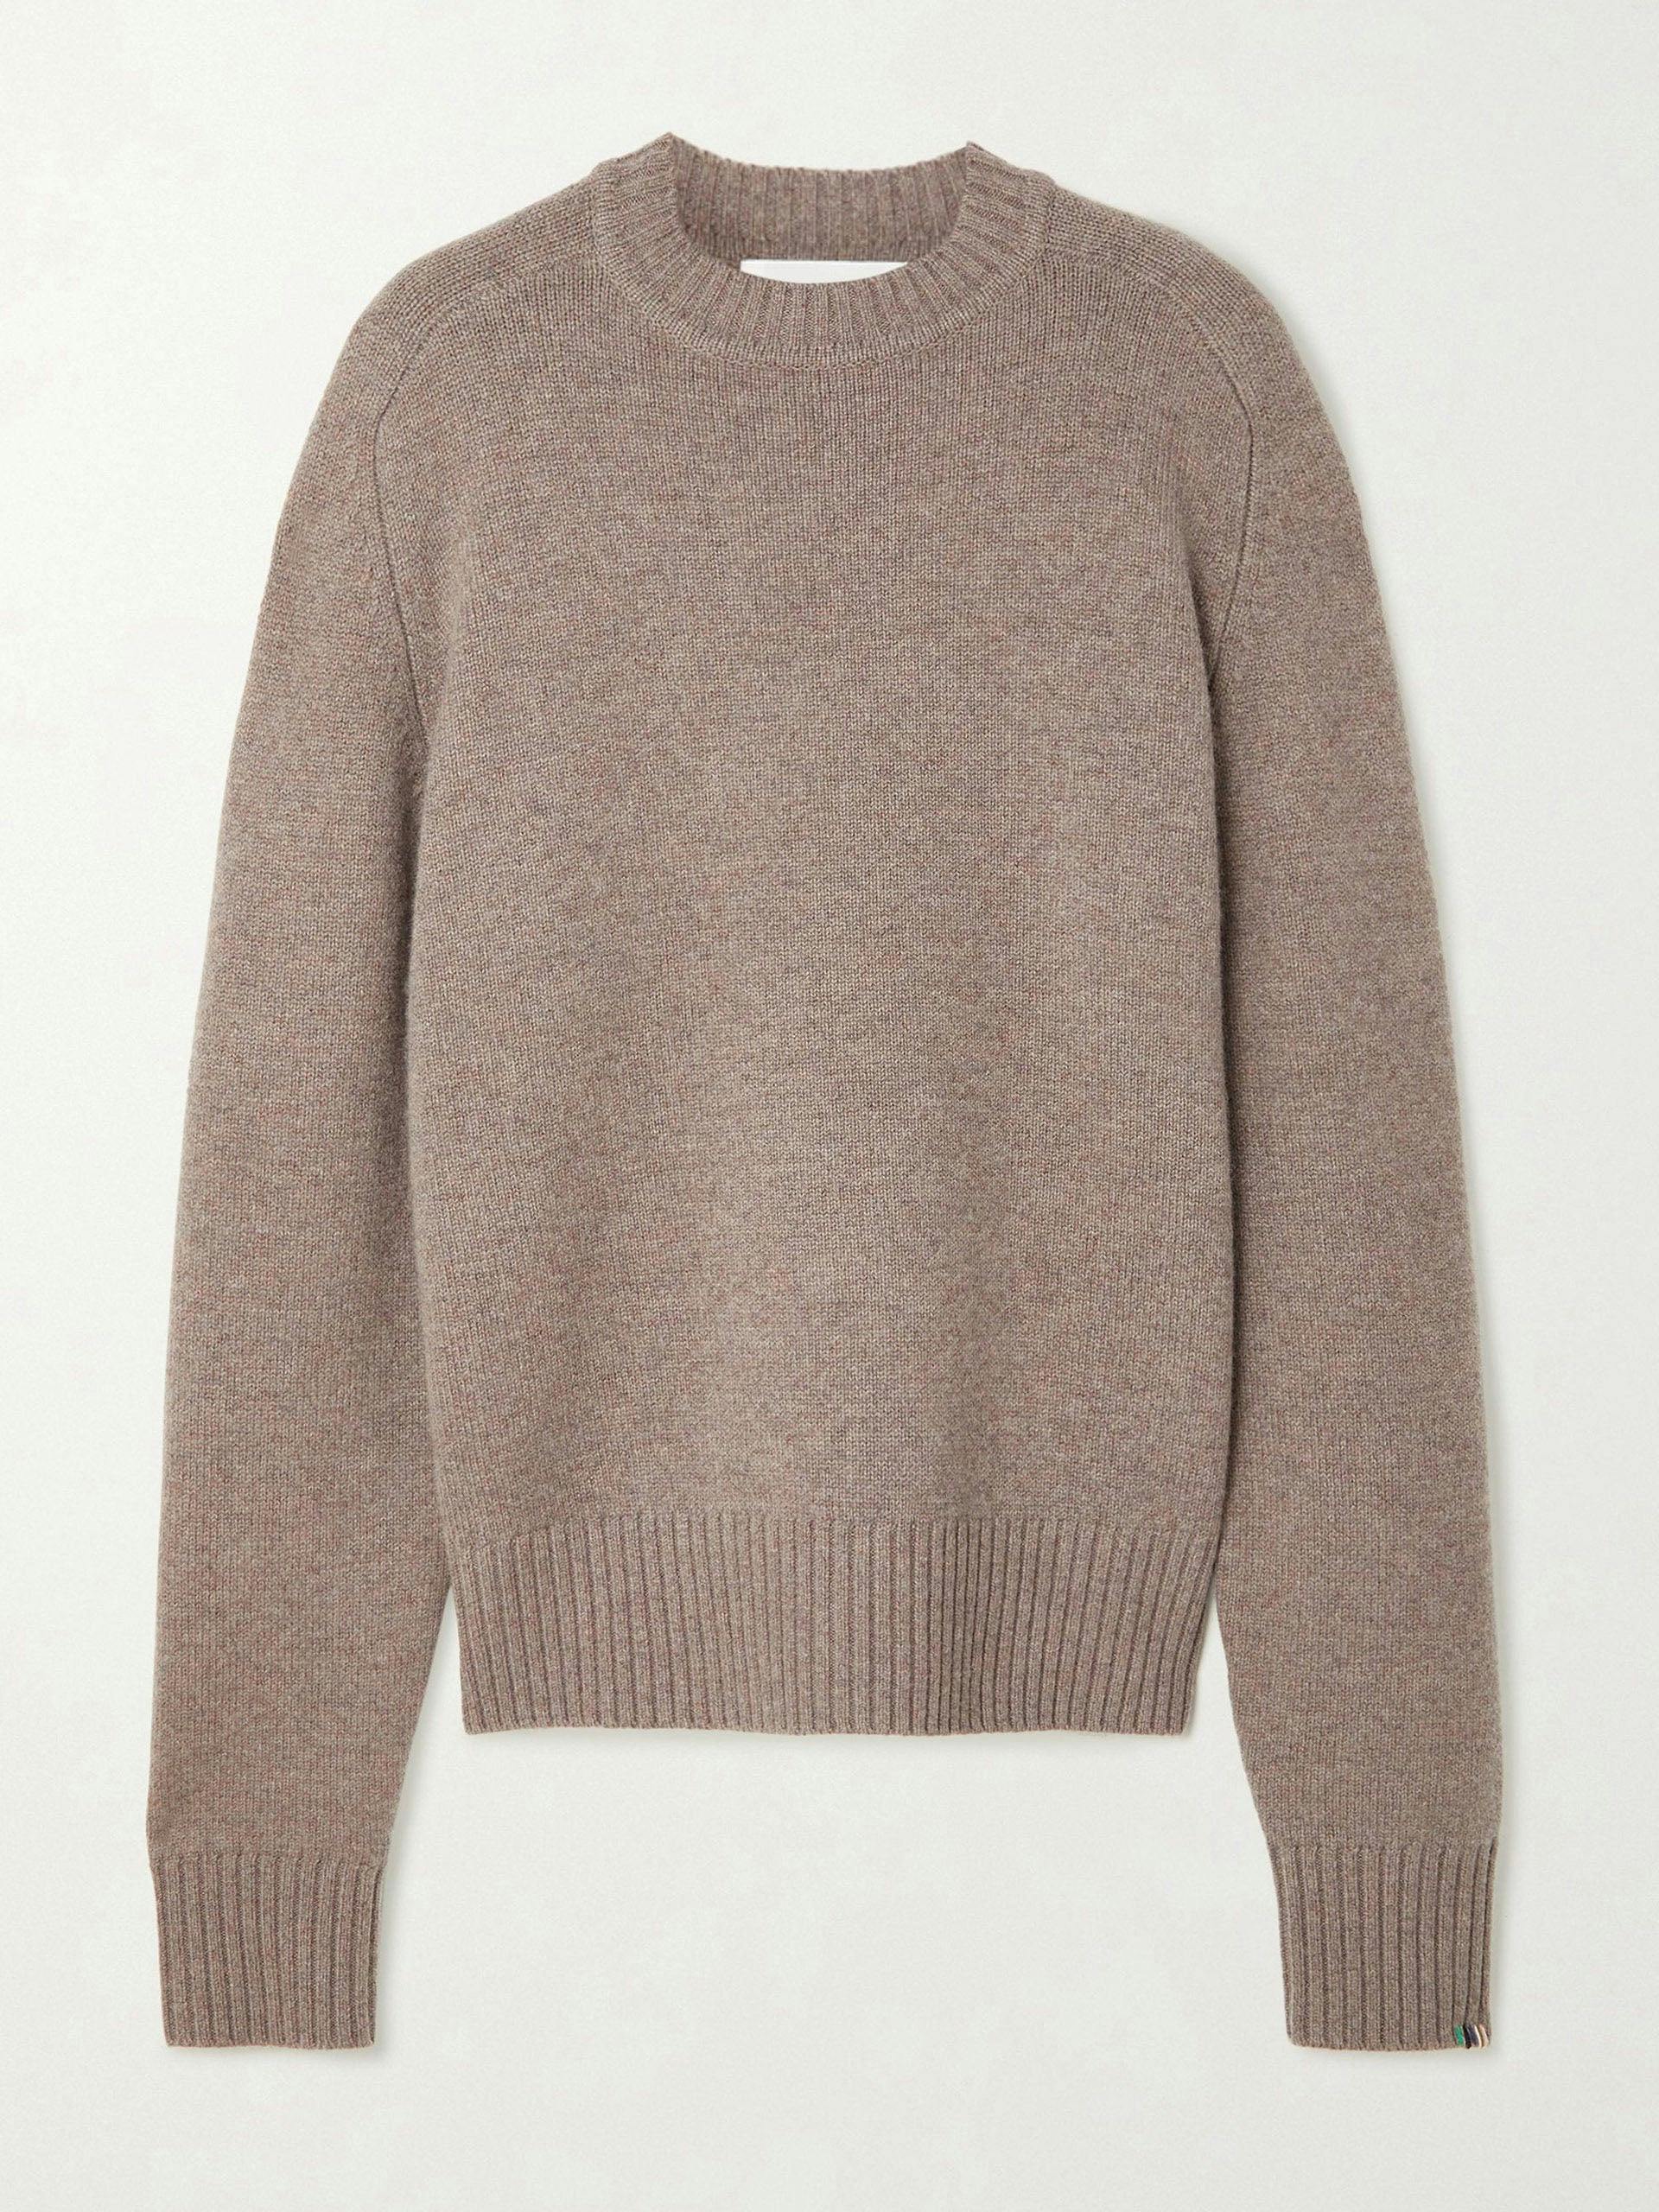 N°123 Bourgeois cashmere-blend sweater